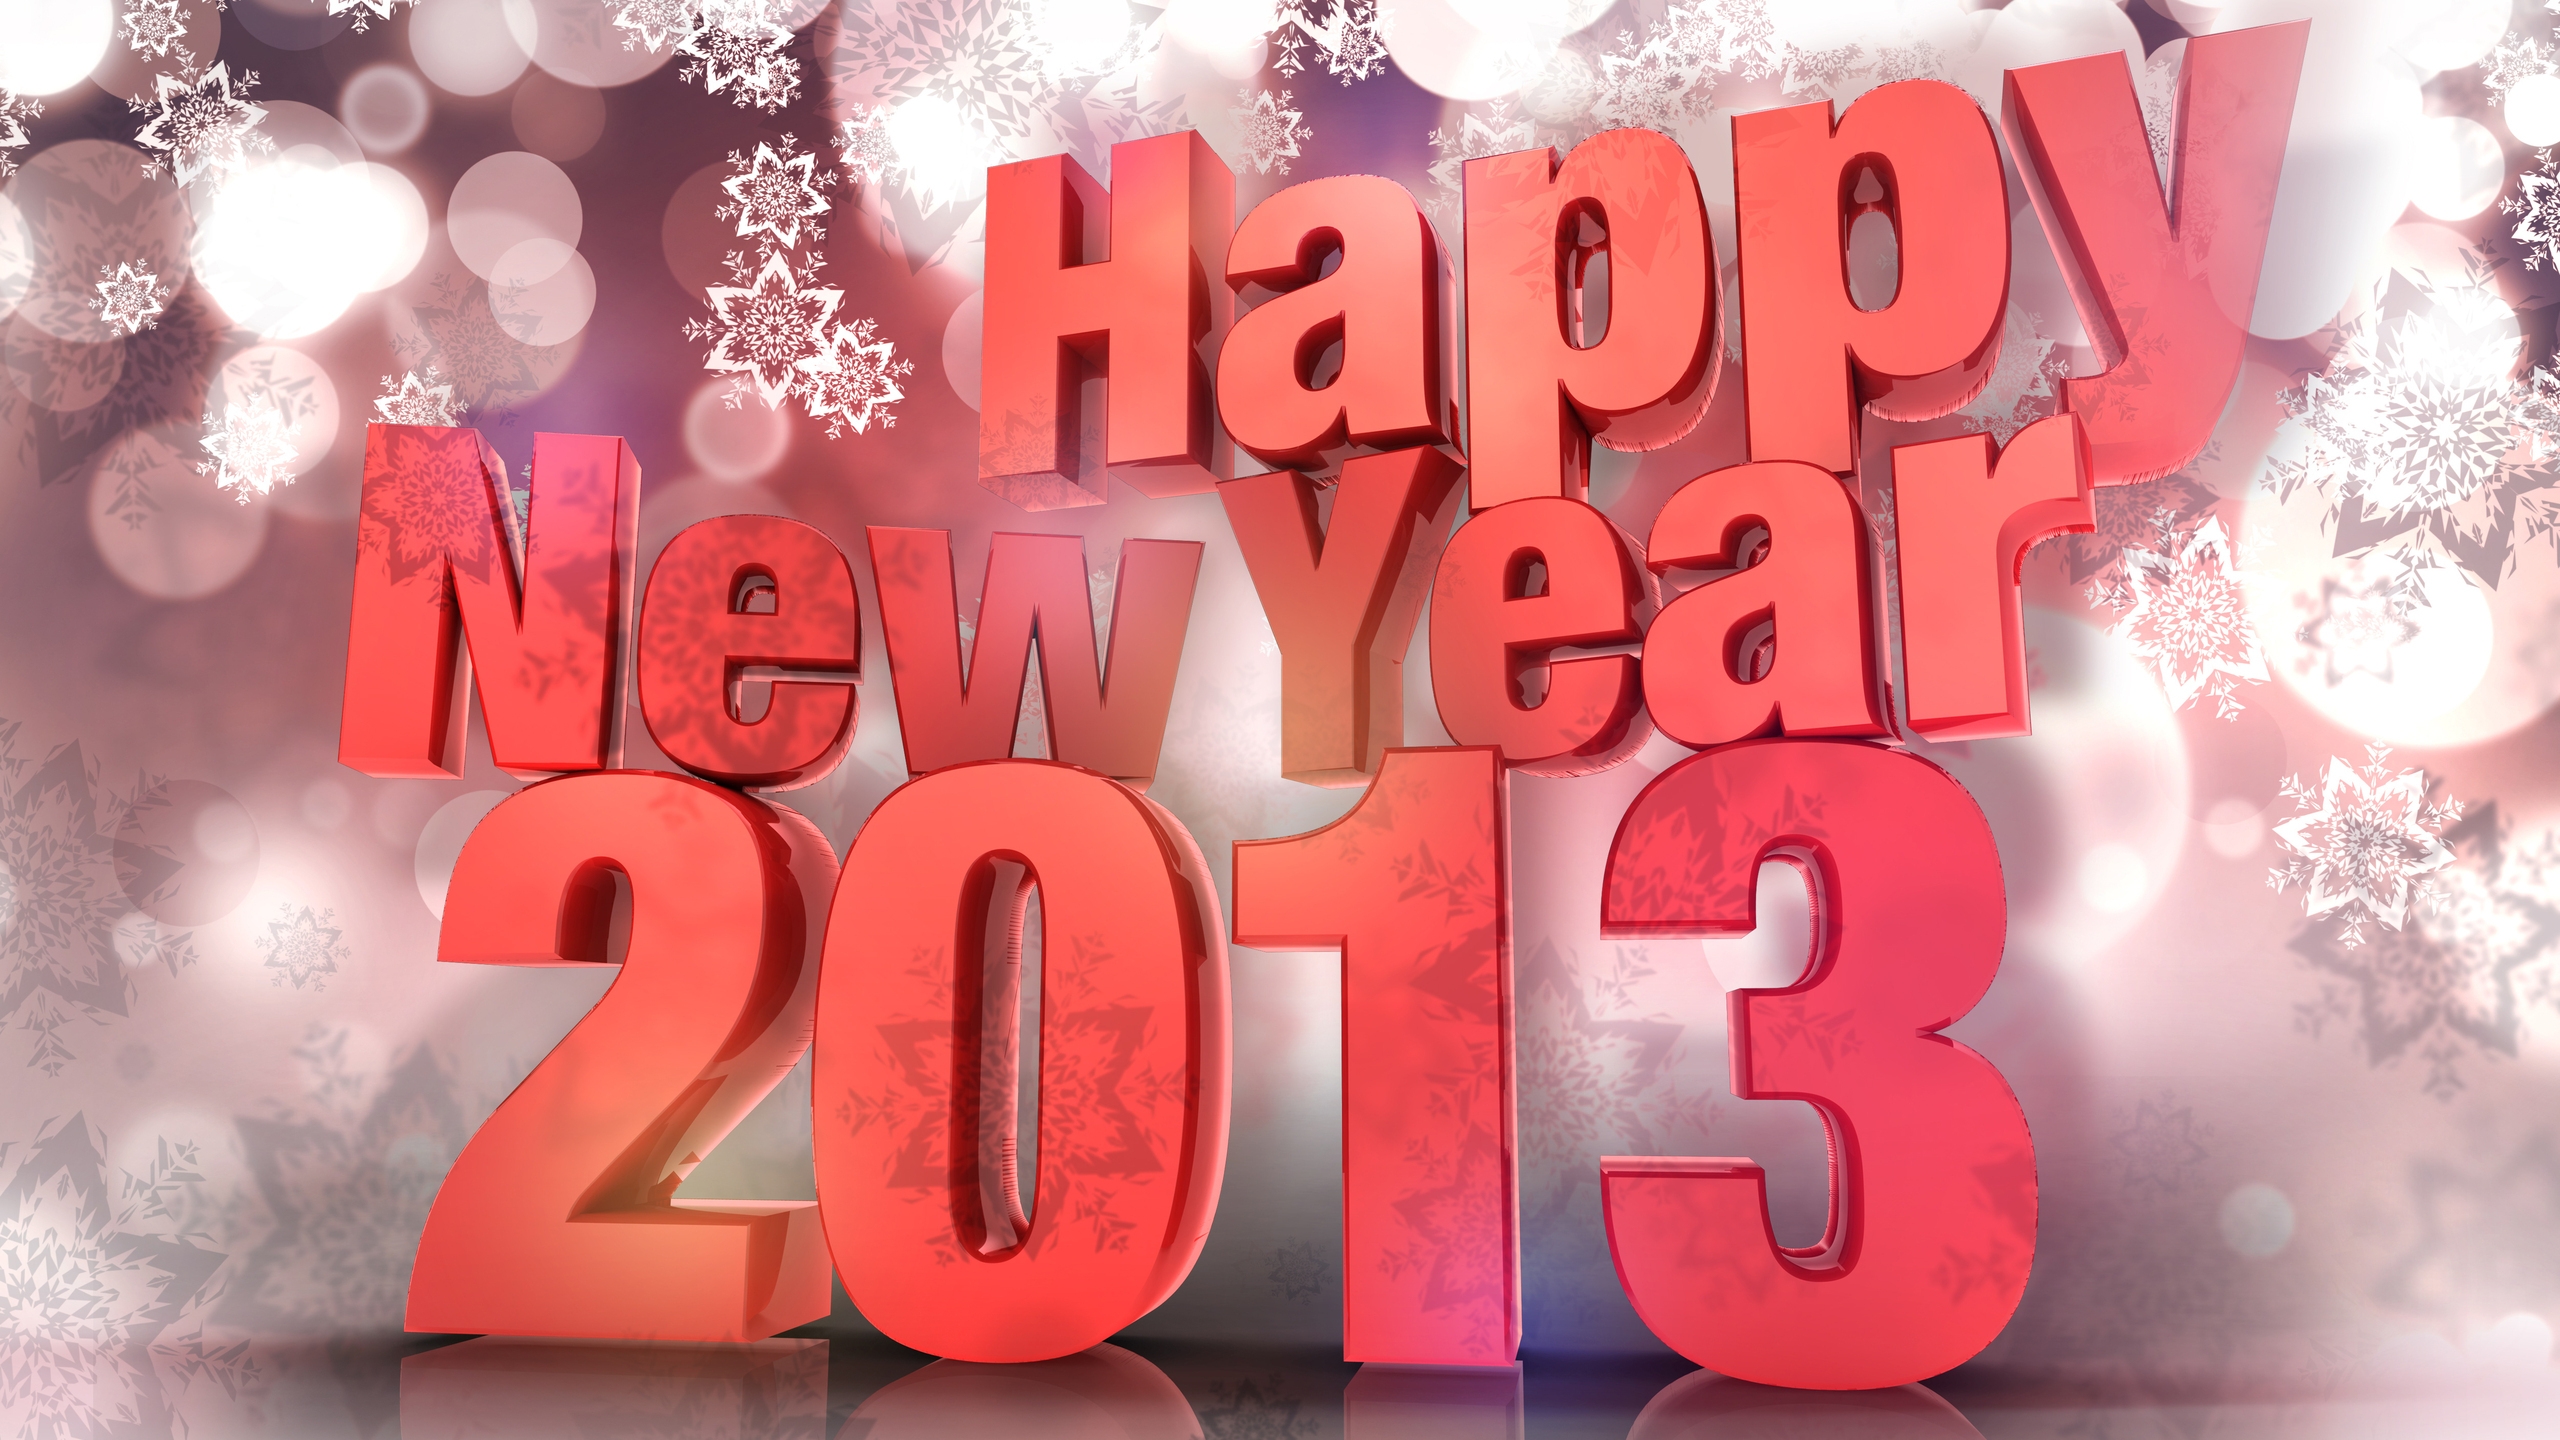 Happy New 2013 for 2560x1440 HDTV resolution